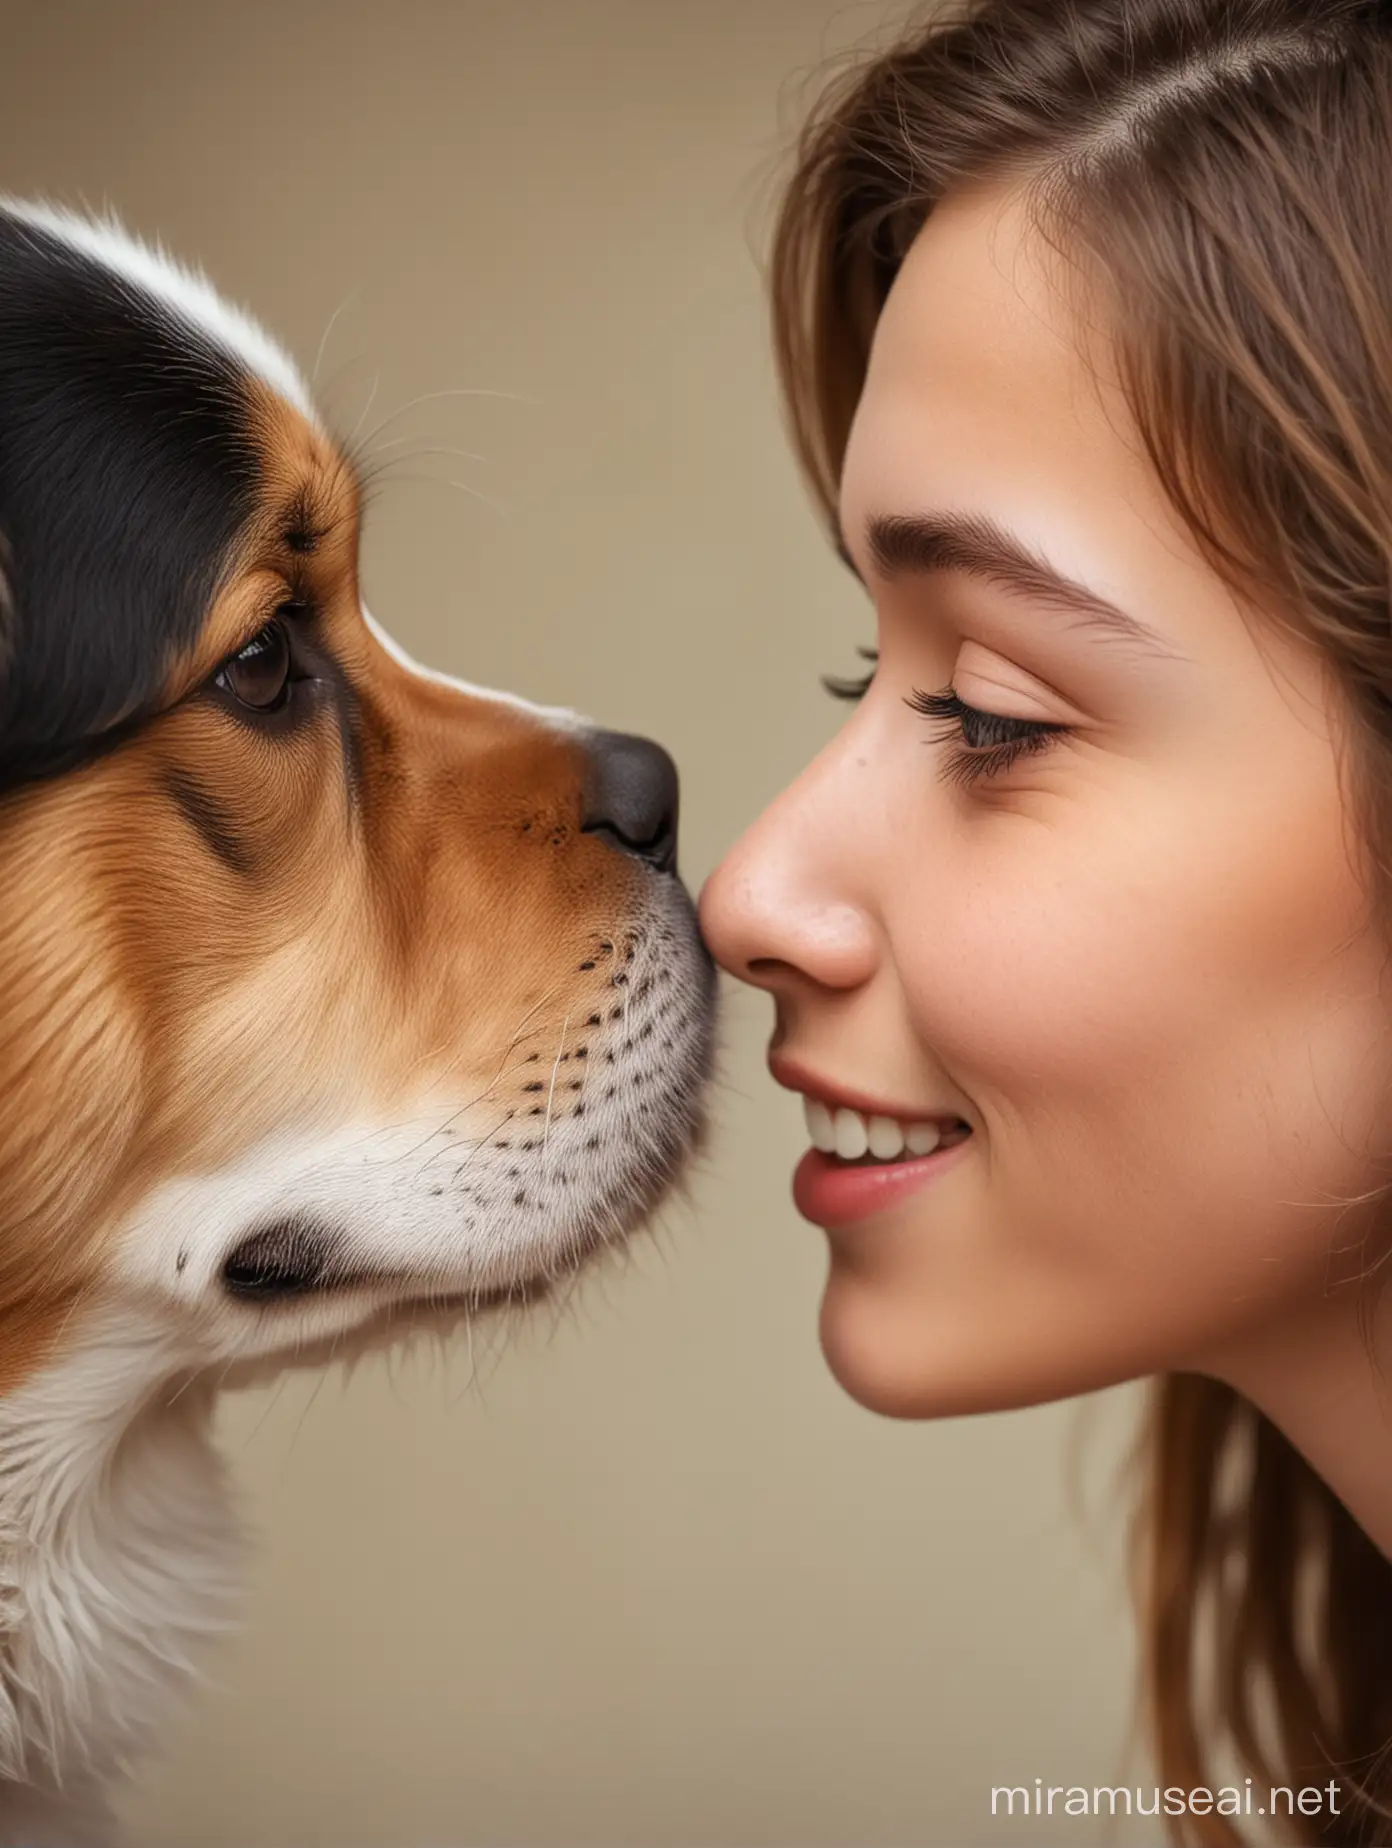 Girl and dog together, their noses are touching and they stare at each other, they are both happy.